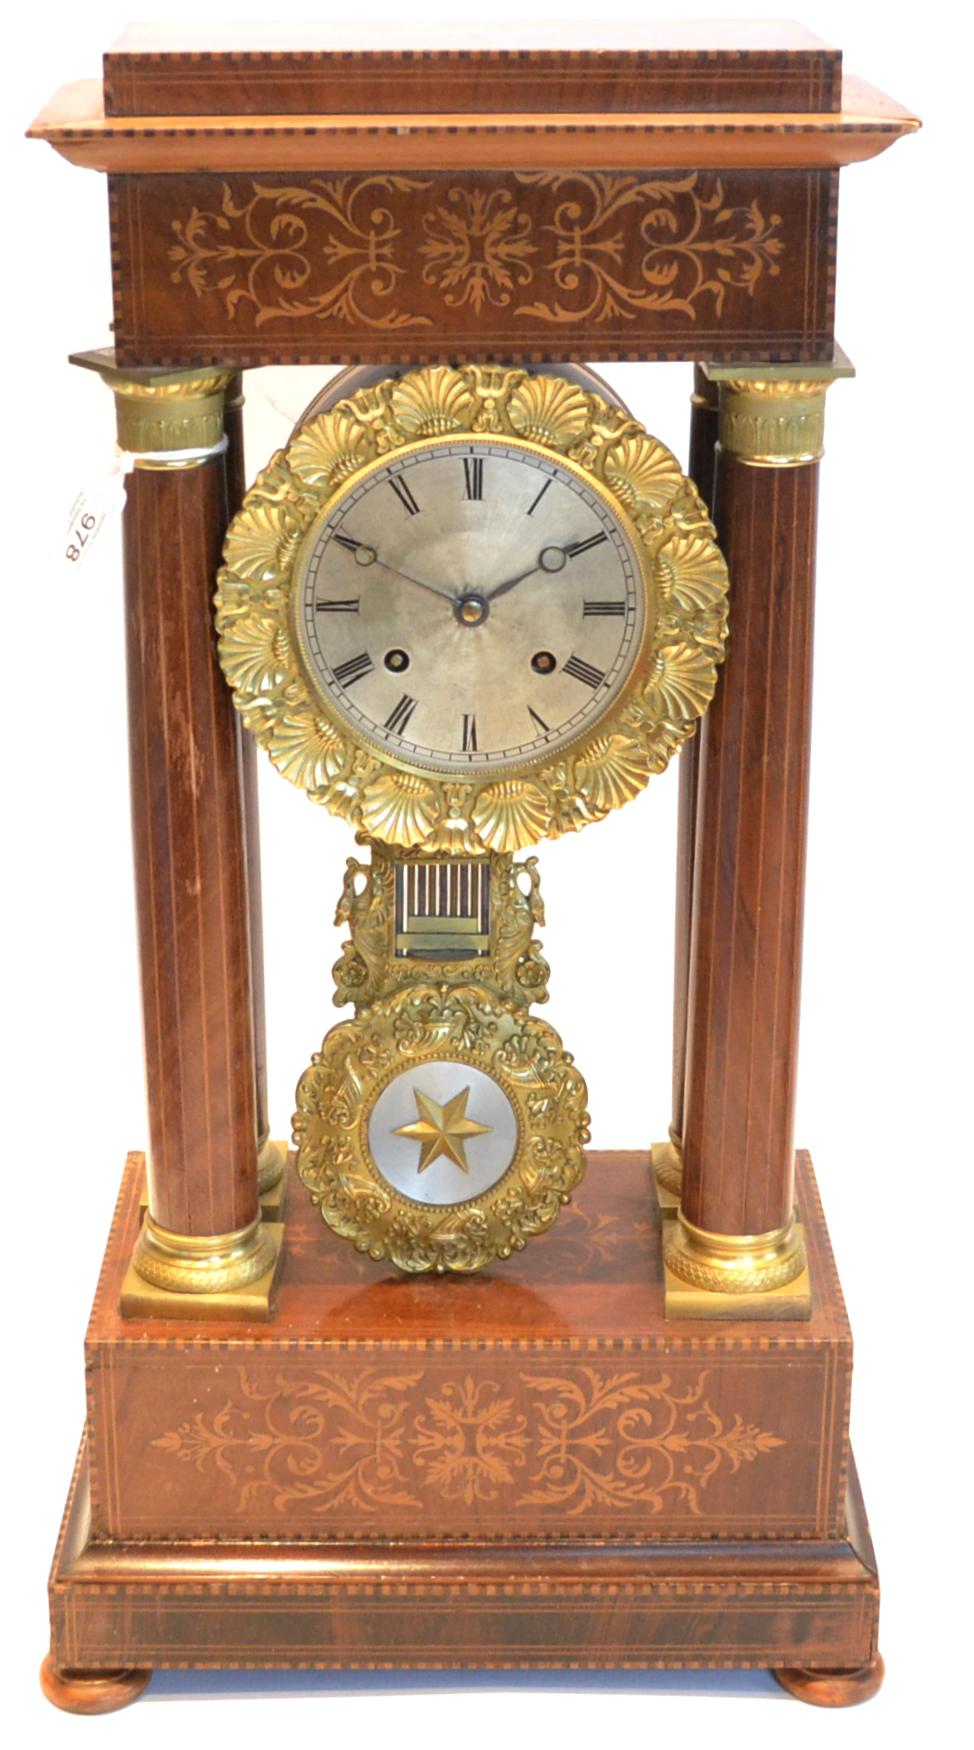 A Rosewood Portico Striking Mantel Clock, circa 1880, inlaid case, 4-inch silvered engine turned